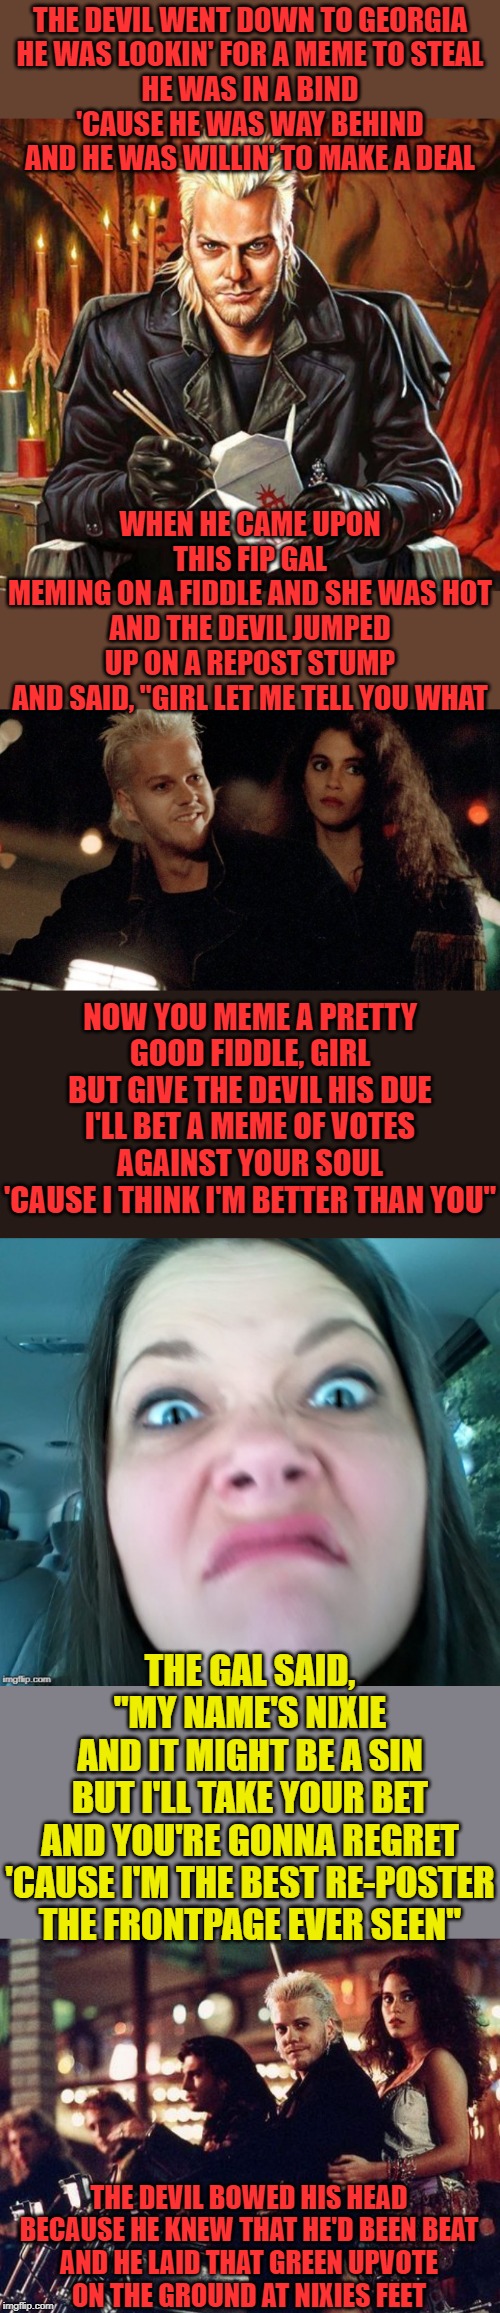 The Devil Lost in Georgia!! |  THE DEVIL WENT DOWN TO GEORGIA
HE WAS LOOKIN' FOR A MEME TO STEAL
HE WAS IN A BIND
'CAUSE HE WAS WAY BEHIND
AND HE WAS WILLIN' TO MAKE A DEAL; WHEN HE CAME UPON THIS FIP GAL
MEMING ON A FIDDLE AND SHE WAS HOT
AND THE DEVIL JUMPED
UP ON A REPOST STUMP
AND SAID, "GIRL LET ME TELL YOU WHAT; NOW YOU MEME A PRETTY GOOD FIDDLE, GIRL
BUT GIVE THE DEVIL HIS DUE
I'LL BET A MEME OF VOTES
AGAINST YOUR SOUL
'CAUSE I THINK I'M BETTER THAN YOU"; THE GAL SAID, "MY NAME'S NIXIE
AND IT MIGHT BE A SIN
BUT I'LL TAKE YOUR BET
AND YOU'RE GONNA REGRET
'CAUSE I'M THE BEST RE-POSTER THE FRONTPAGE EVER SEEN"; THE DEVIL BOWED HIS HEAD
BECAUSE HE KNEW THAT HE'D BEEN BEAT
AND HE LAID THAT GREEN UPVOTE
ON THE GROUND AT NIXIES FEET | image tagged in nixieknox,repost,lost,boy,georgia,the devil | made w/ Imgflip meme maker